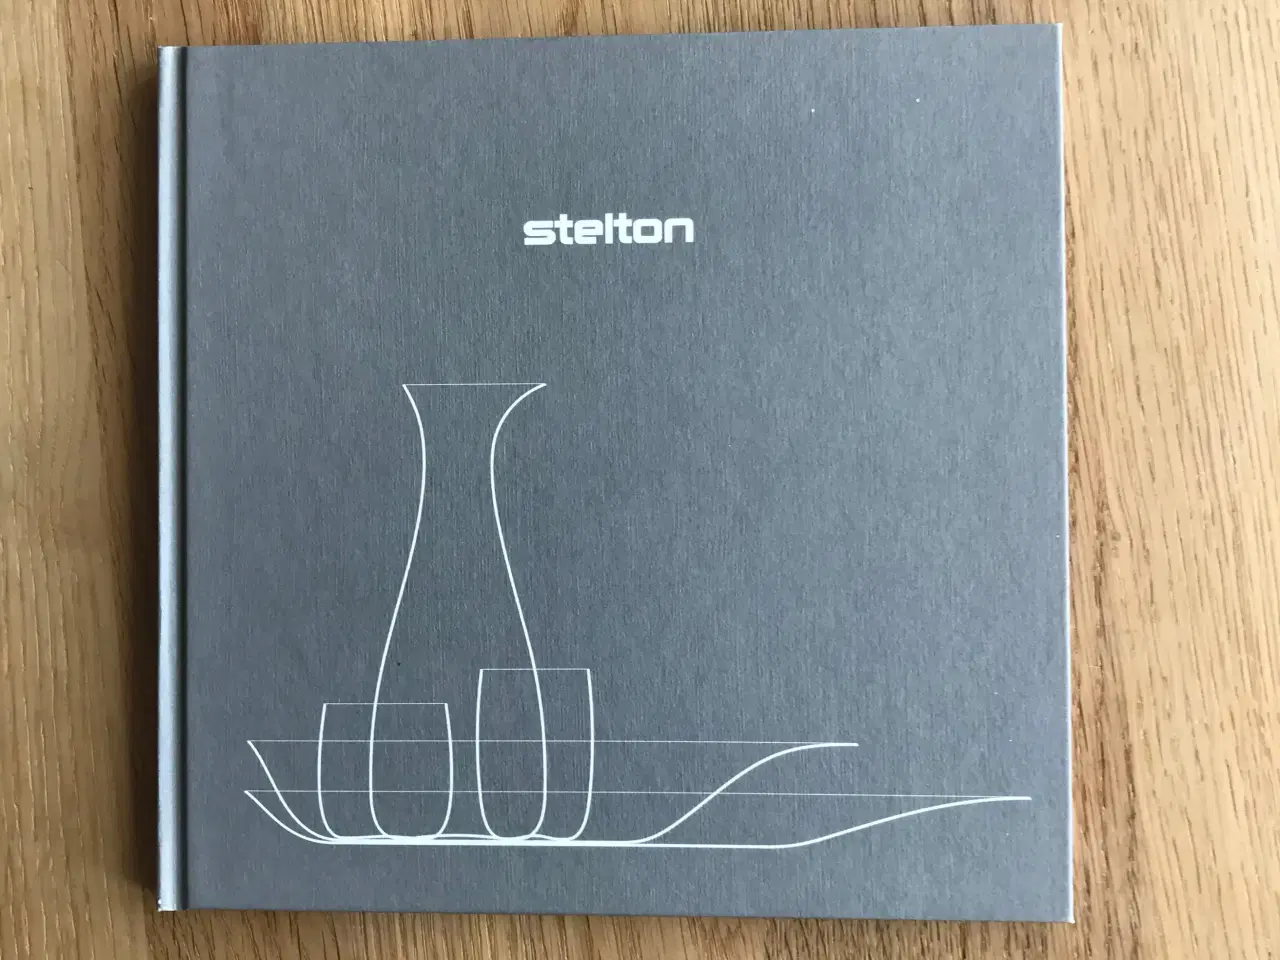 Billede 1 - stelton  -  Working with architects an designers 